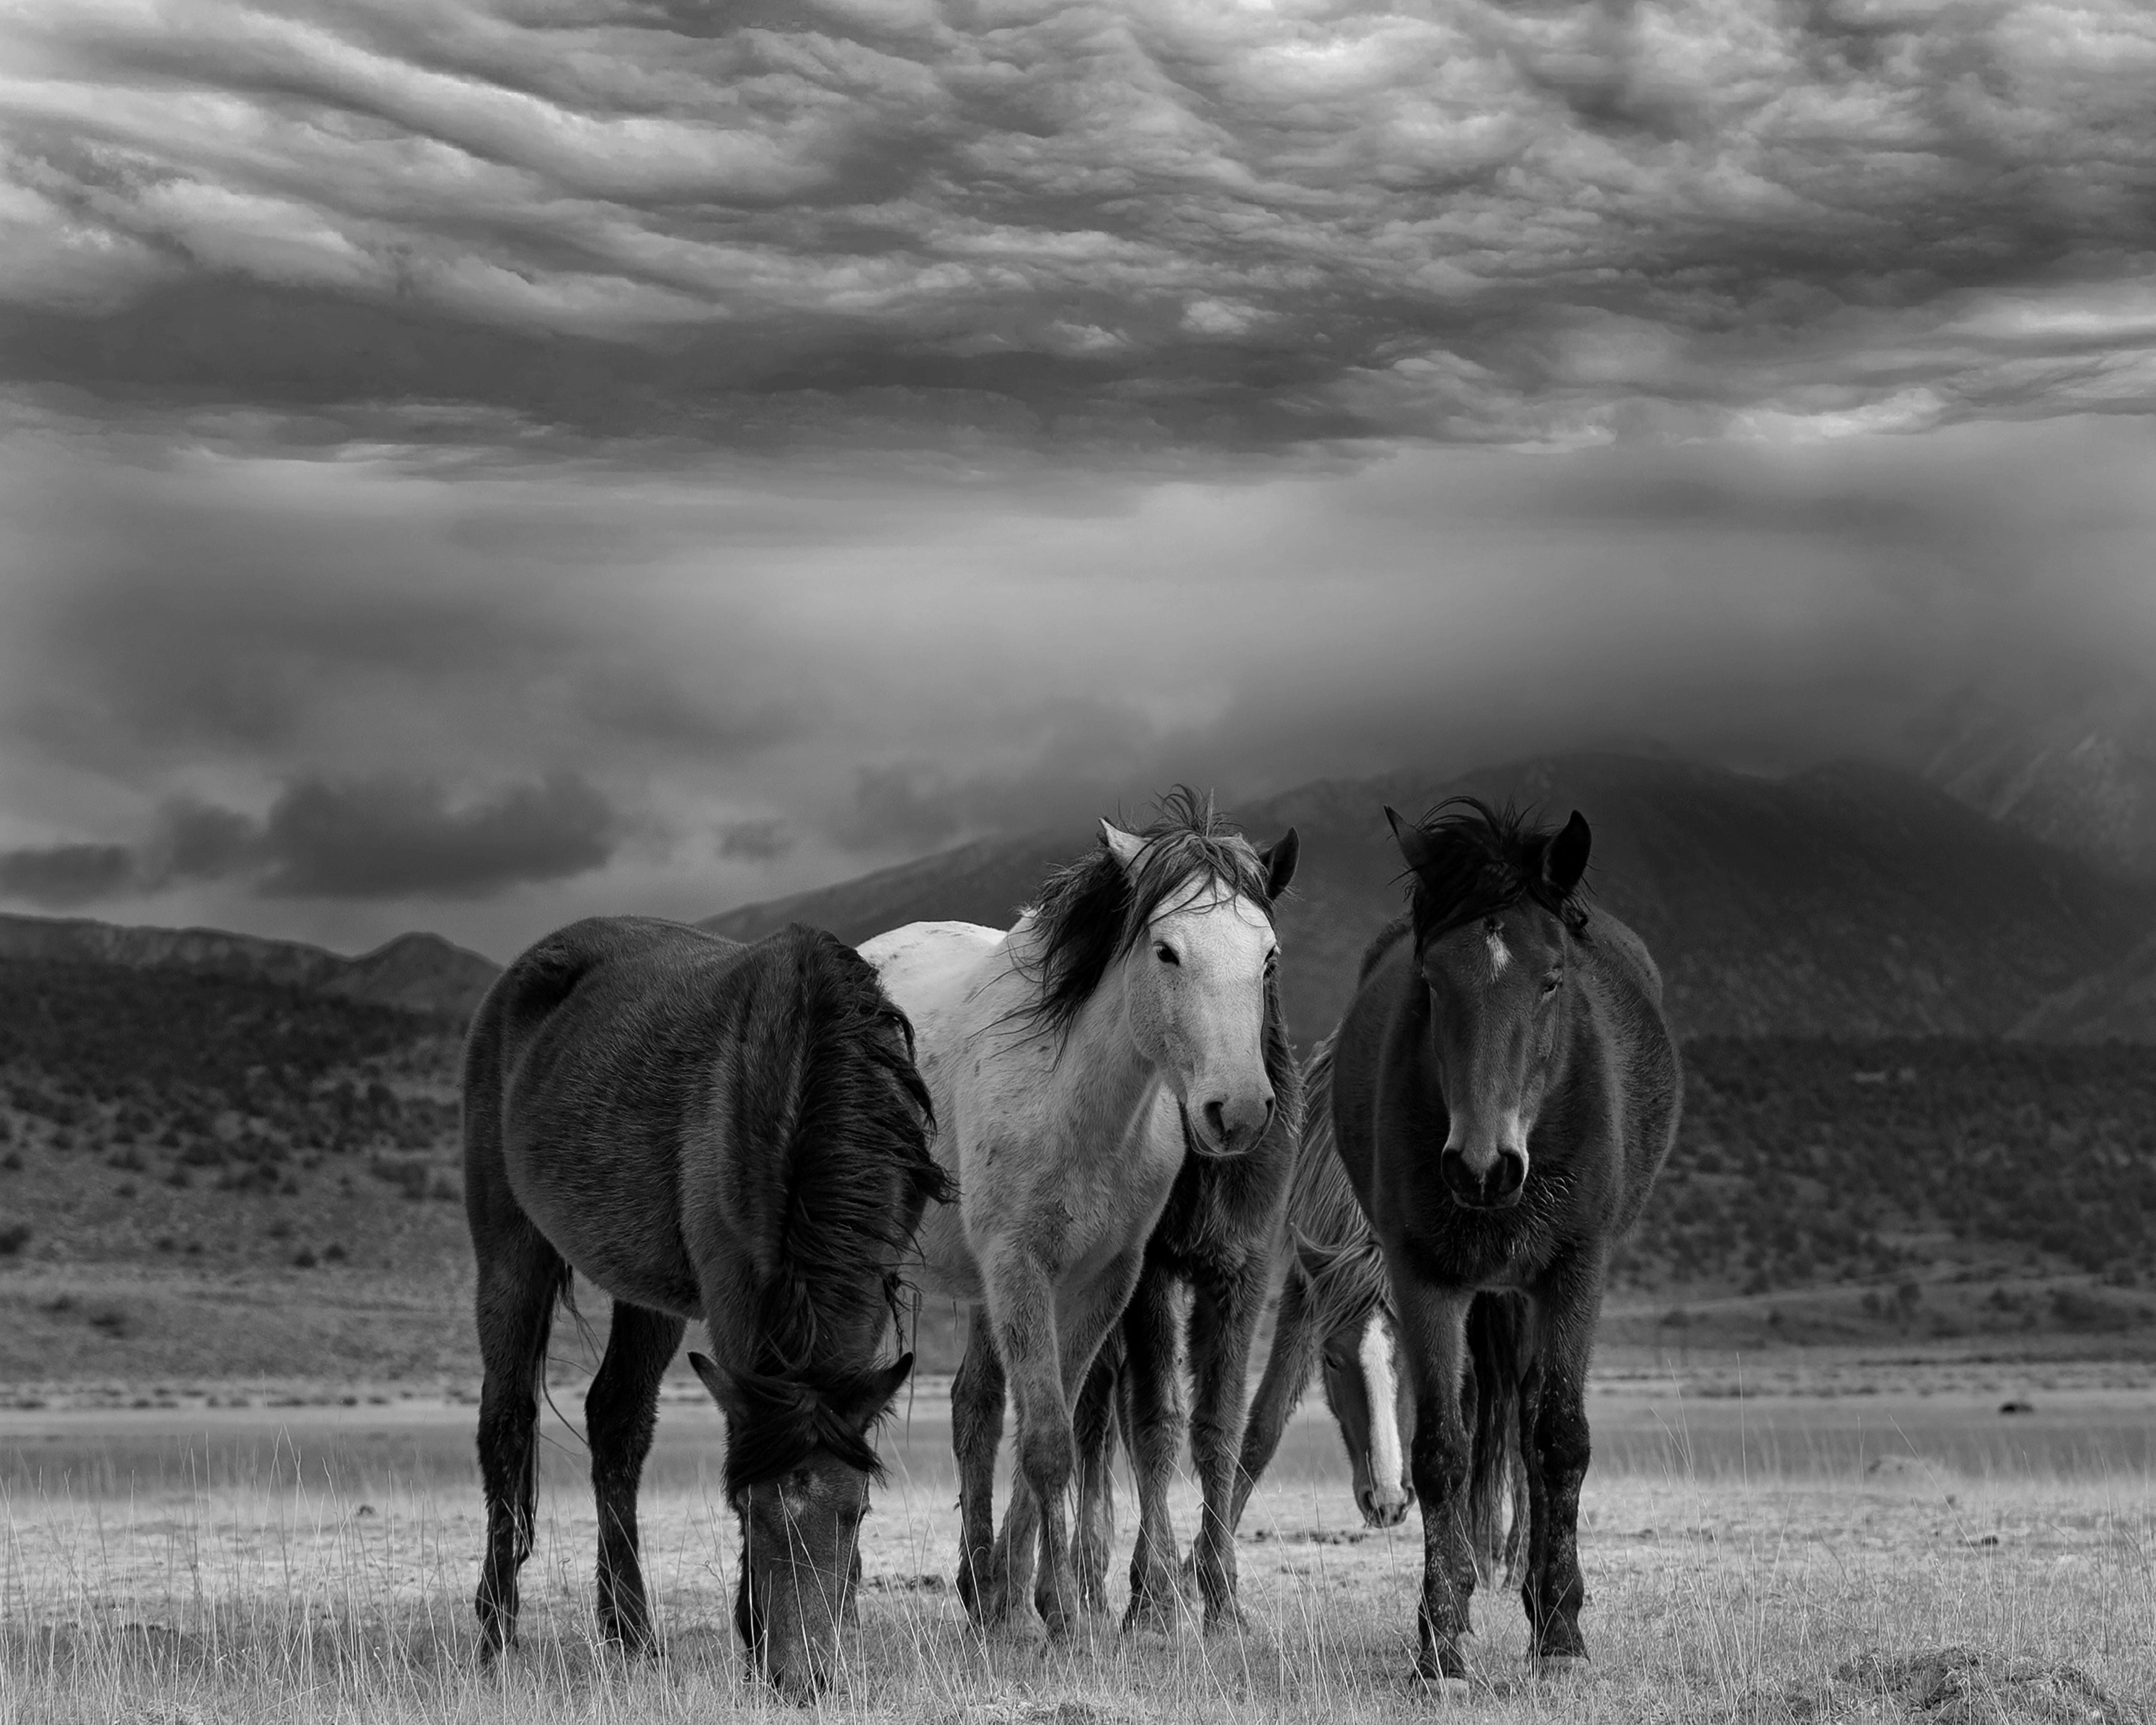 Shane Russeck Animal Print - "Dust and Horses" 45x60 Black and White Photography Wild Horses Mustangs Art